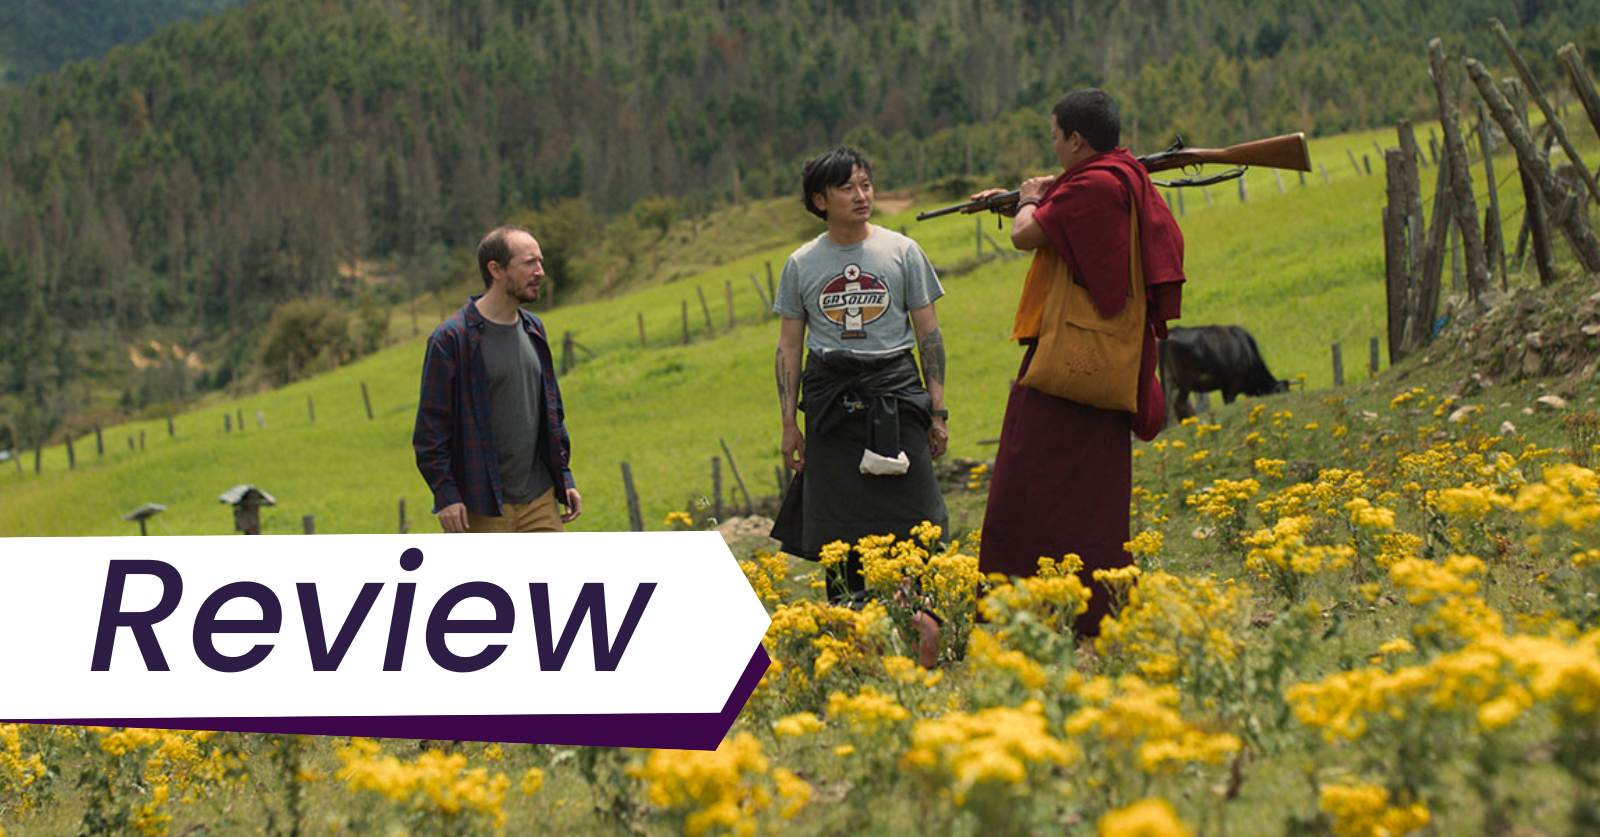 An American, his Bhutanese guide, and a monk holding a gun discuss the gun in The Monk and the Gun, directed by Pawo Choyning Dorji. They are standing on a large field with yellow flowers in the foreground and a hilly forest in the background.